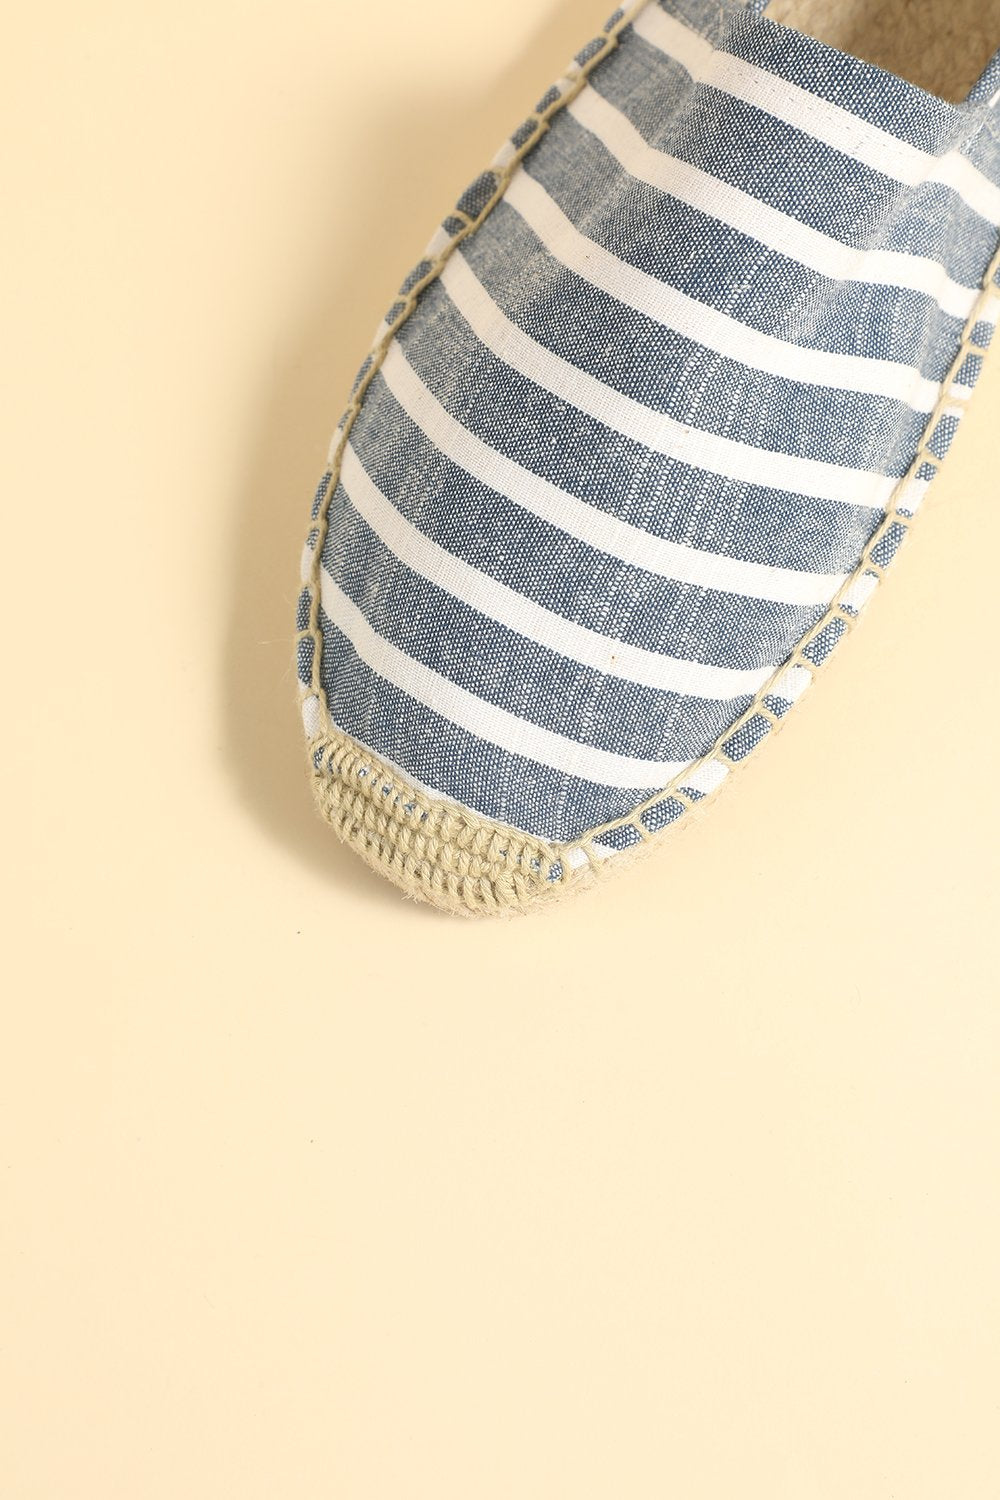 Summer Straw Woven Canvas Shoes